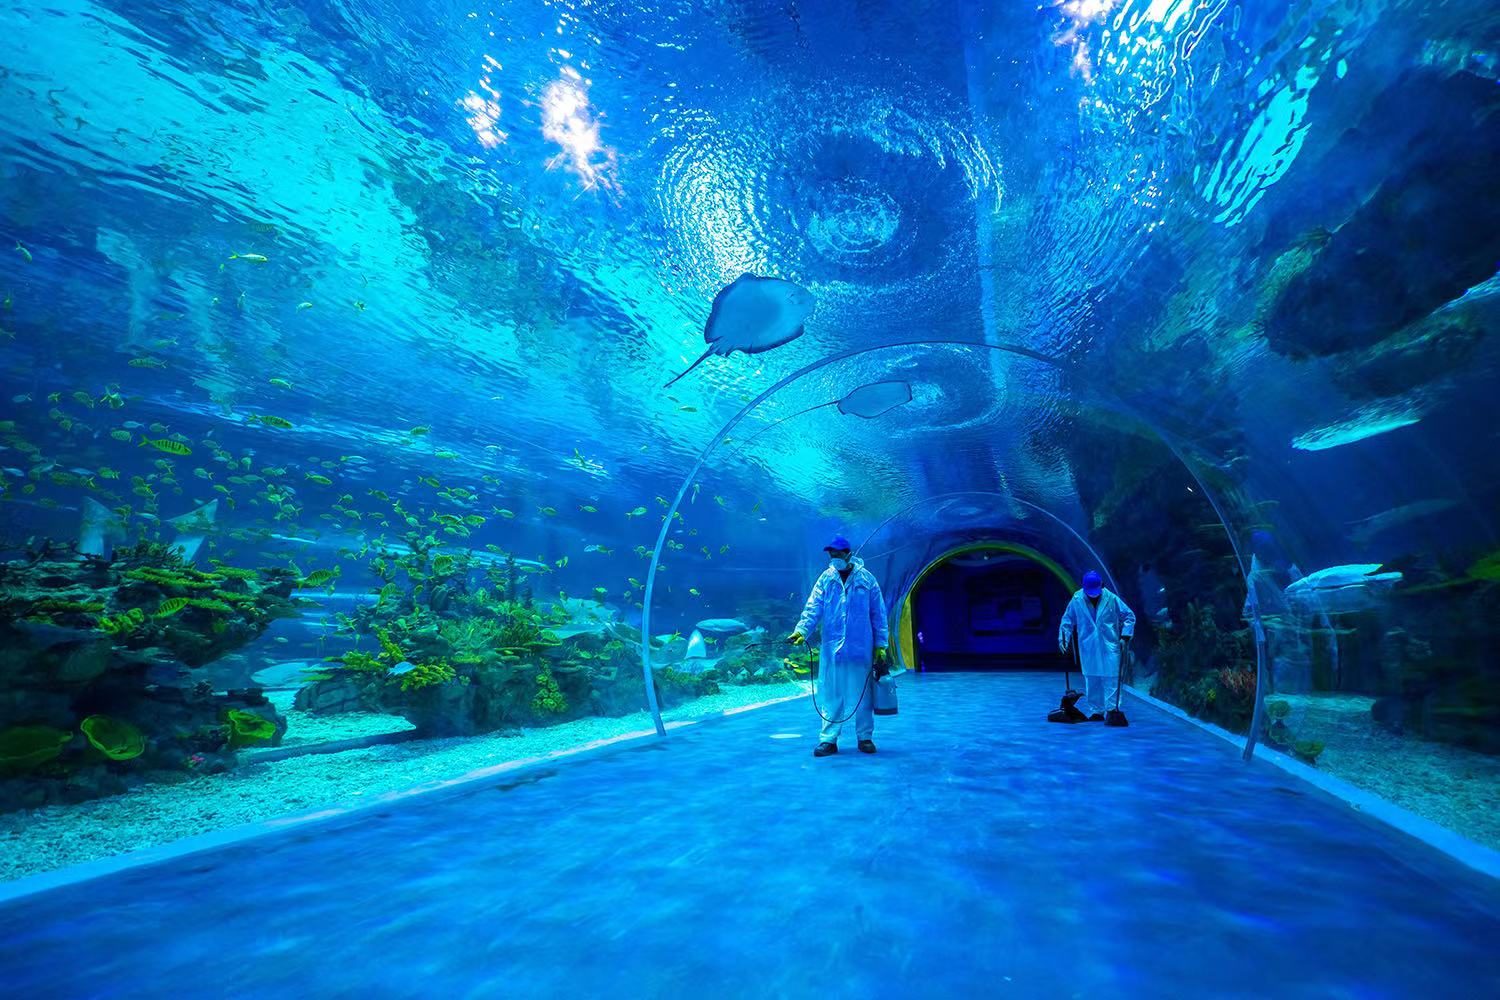 MBK Partners to acquire ocean parks from HK-listed Haichang for $1b